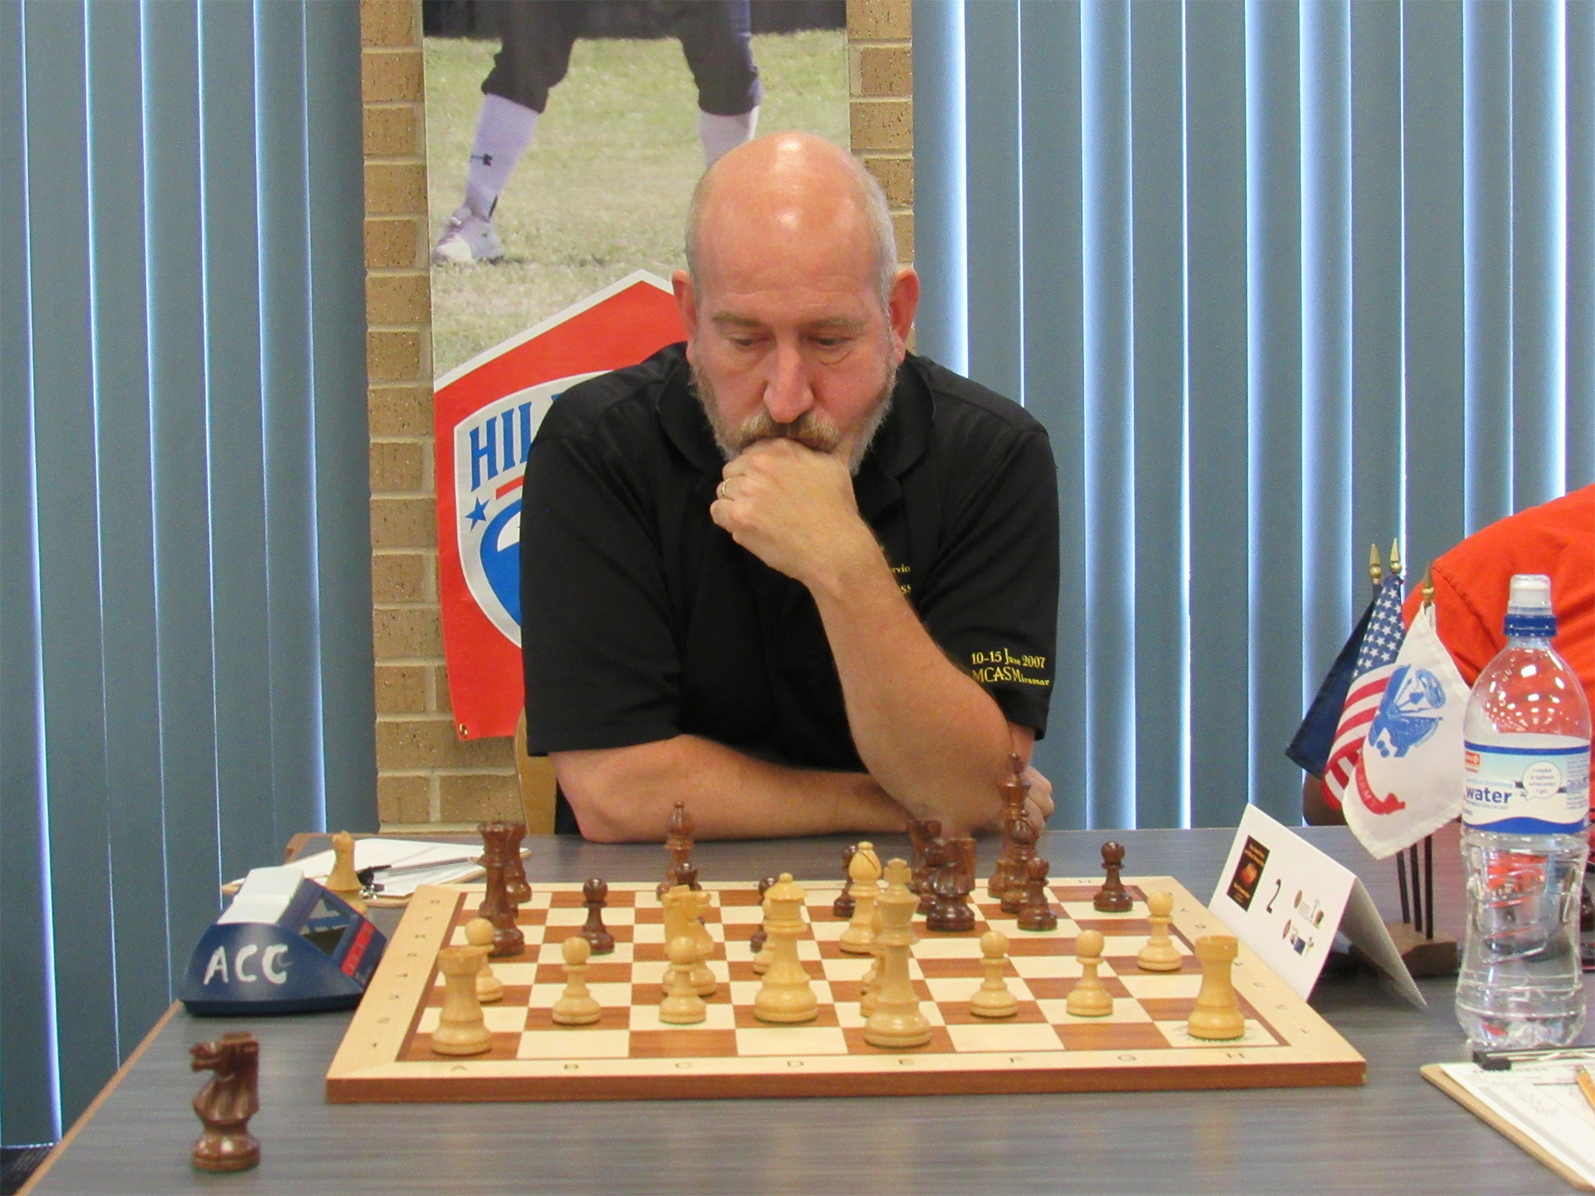 David Hater at the 2018 Texas Armed Forces Chess Championship.  Photo by Sheryl Mc Broom.